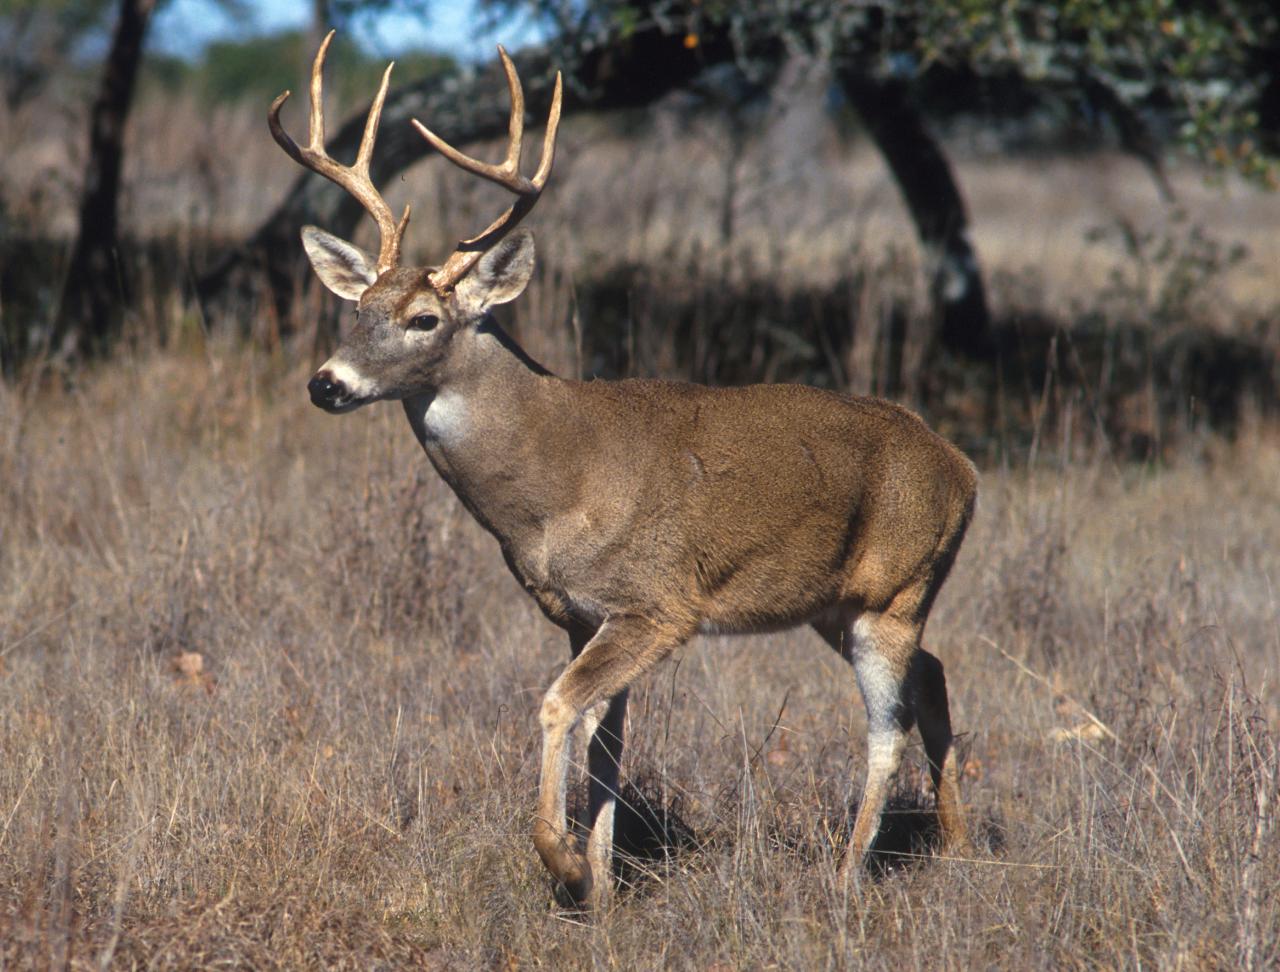 Deer tailed file commons whitetail wikimedia animal tail found